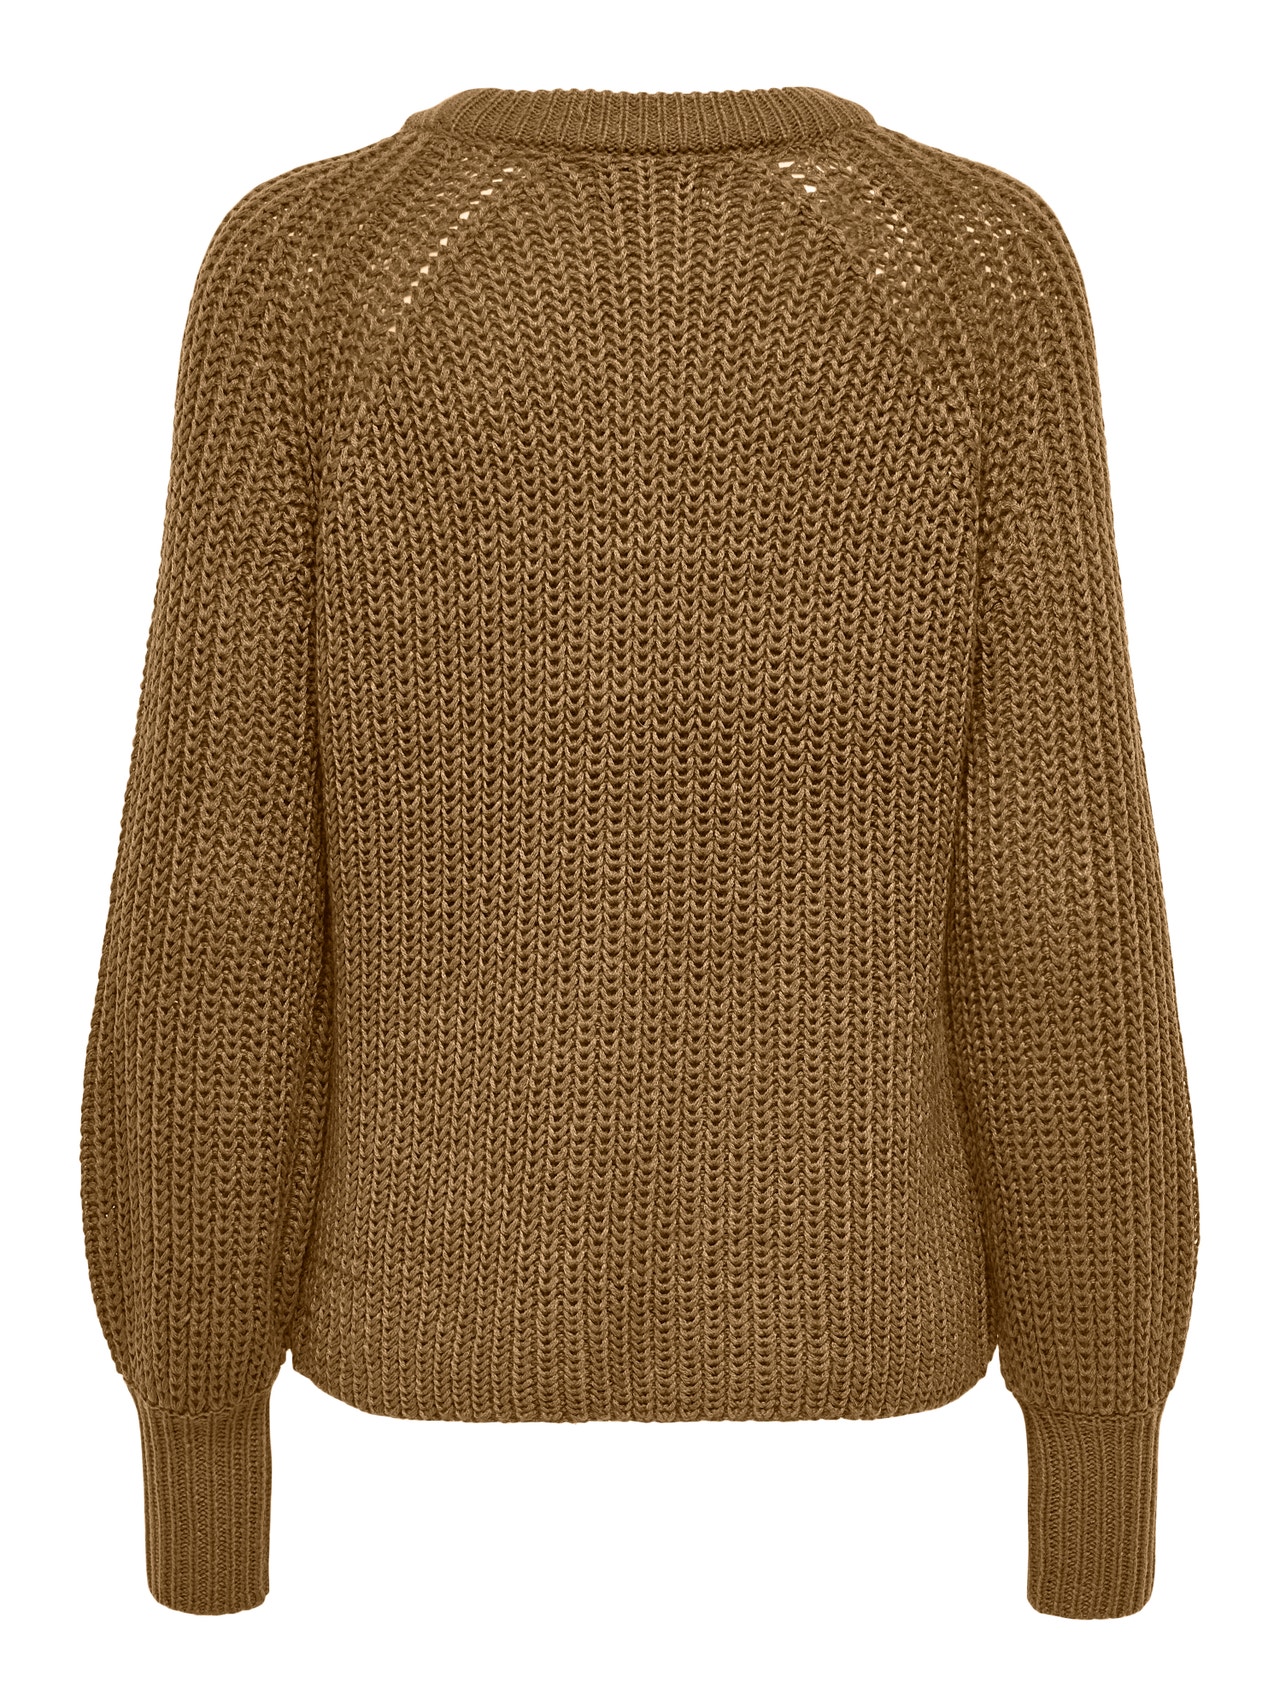 ONLY Balloon detail Knitted Pullover -Toasted Coconut - 15243903